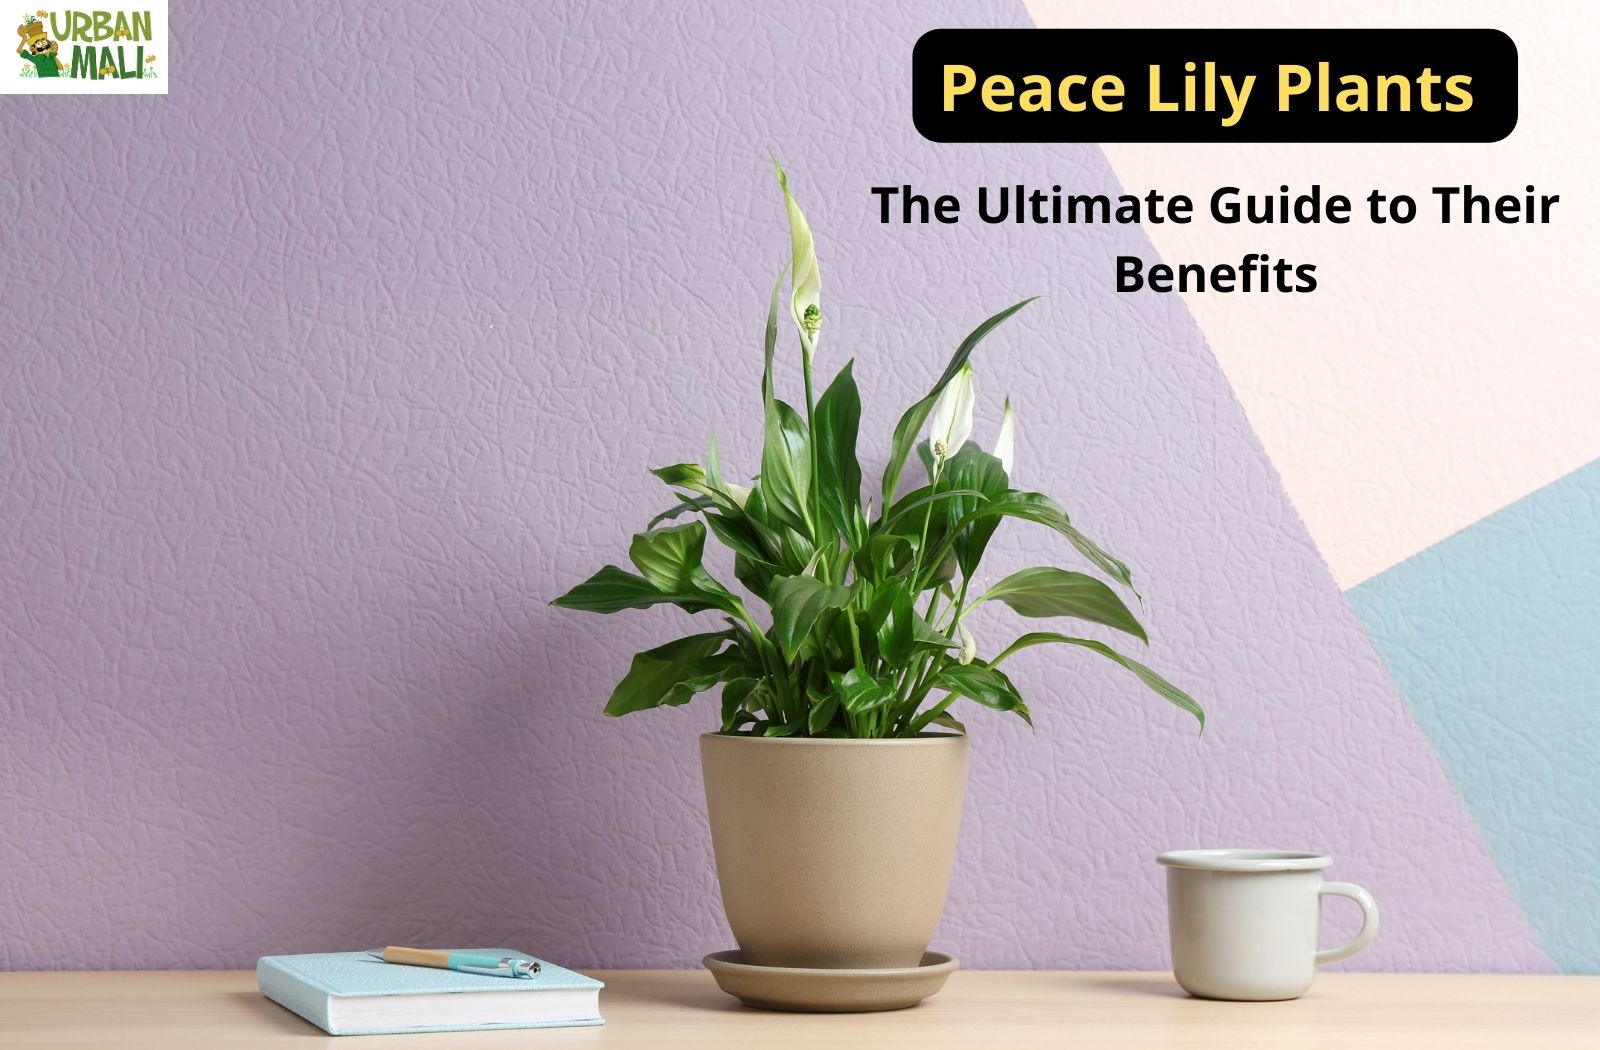 Peace Lily Plants: The Ultimate Guide to Their Benefits